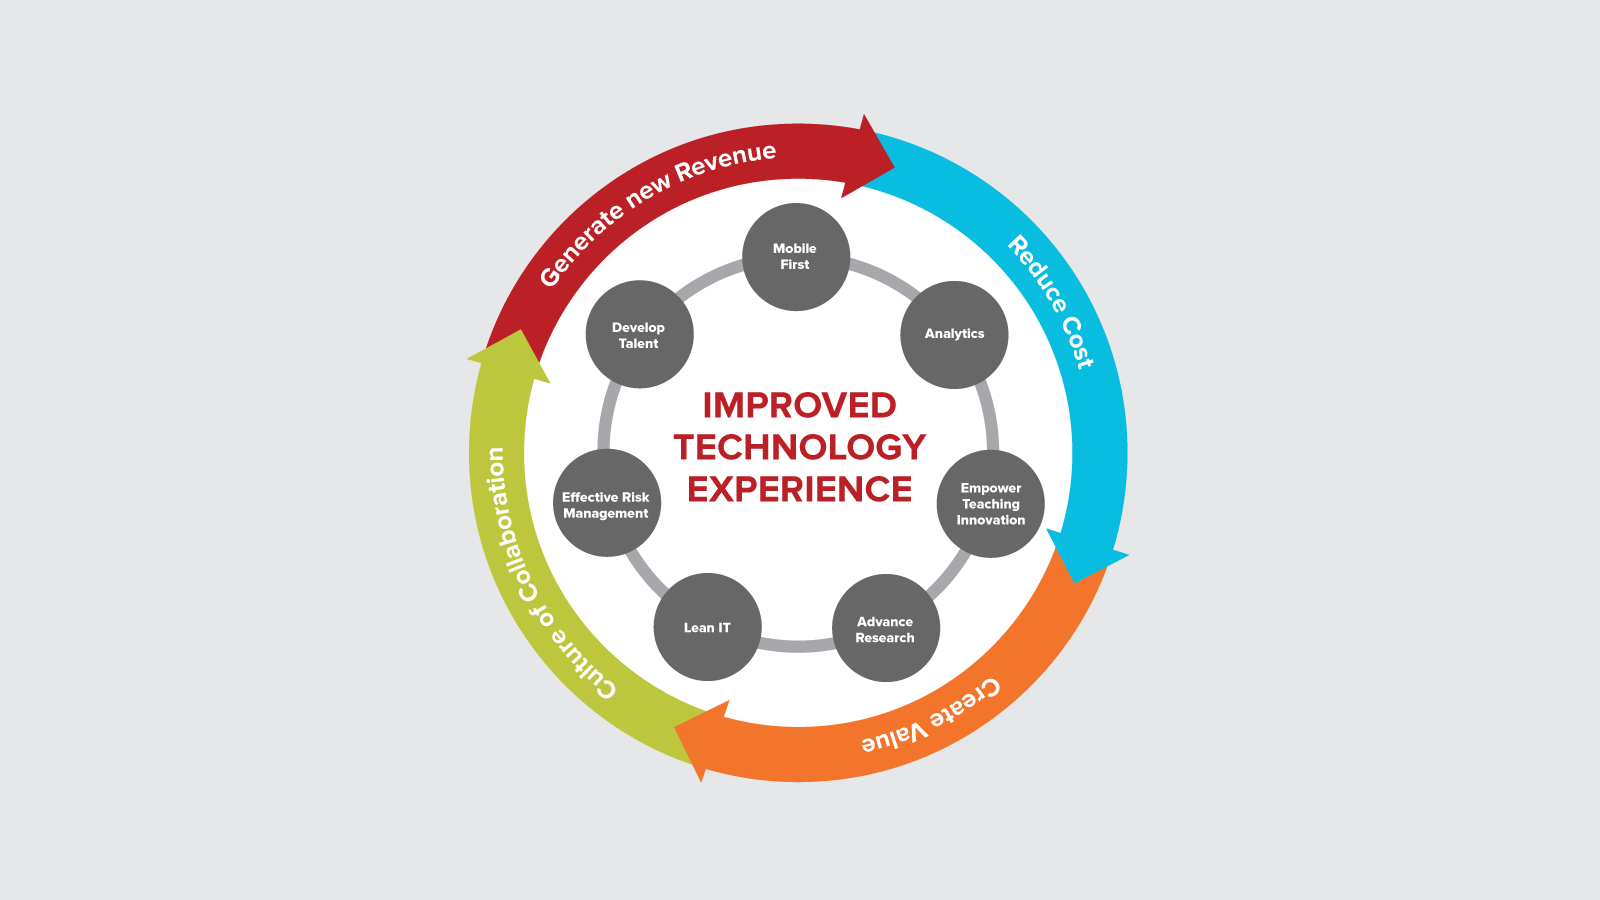 Cycle for Improved Technology Experiences: Culture of collaboration, Generate new revenue, reduce cost, create value